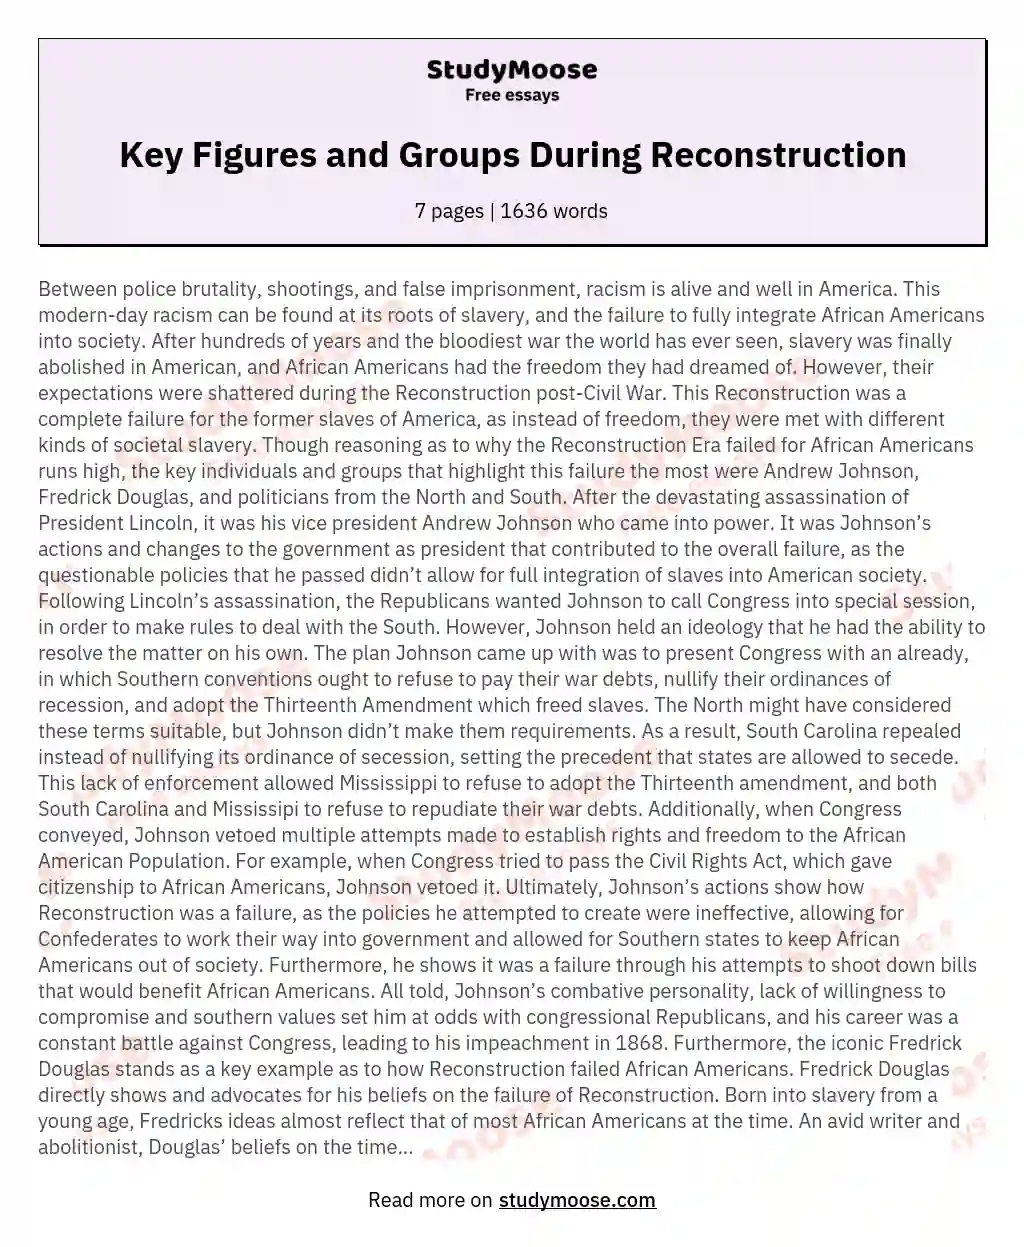 Key Figures and Groups During Reconstruction essay